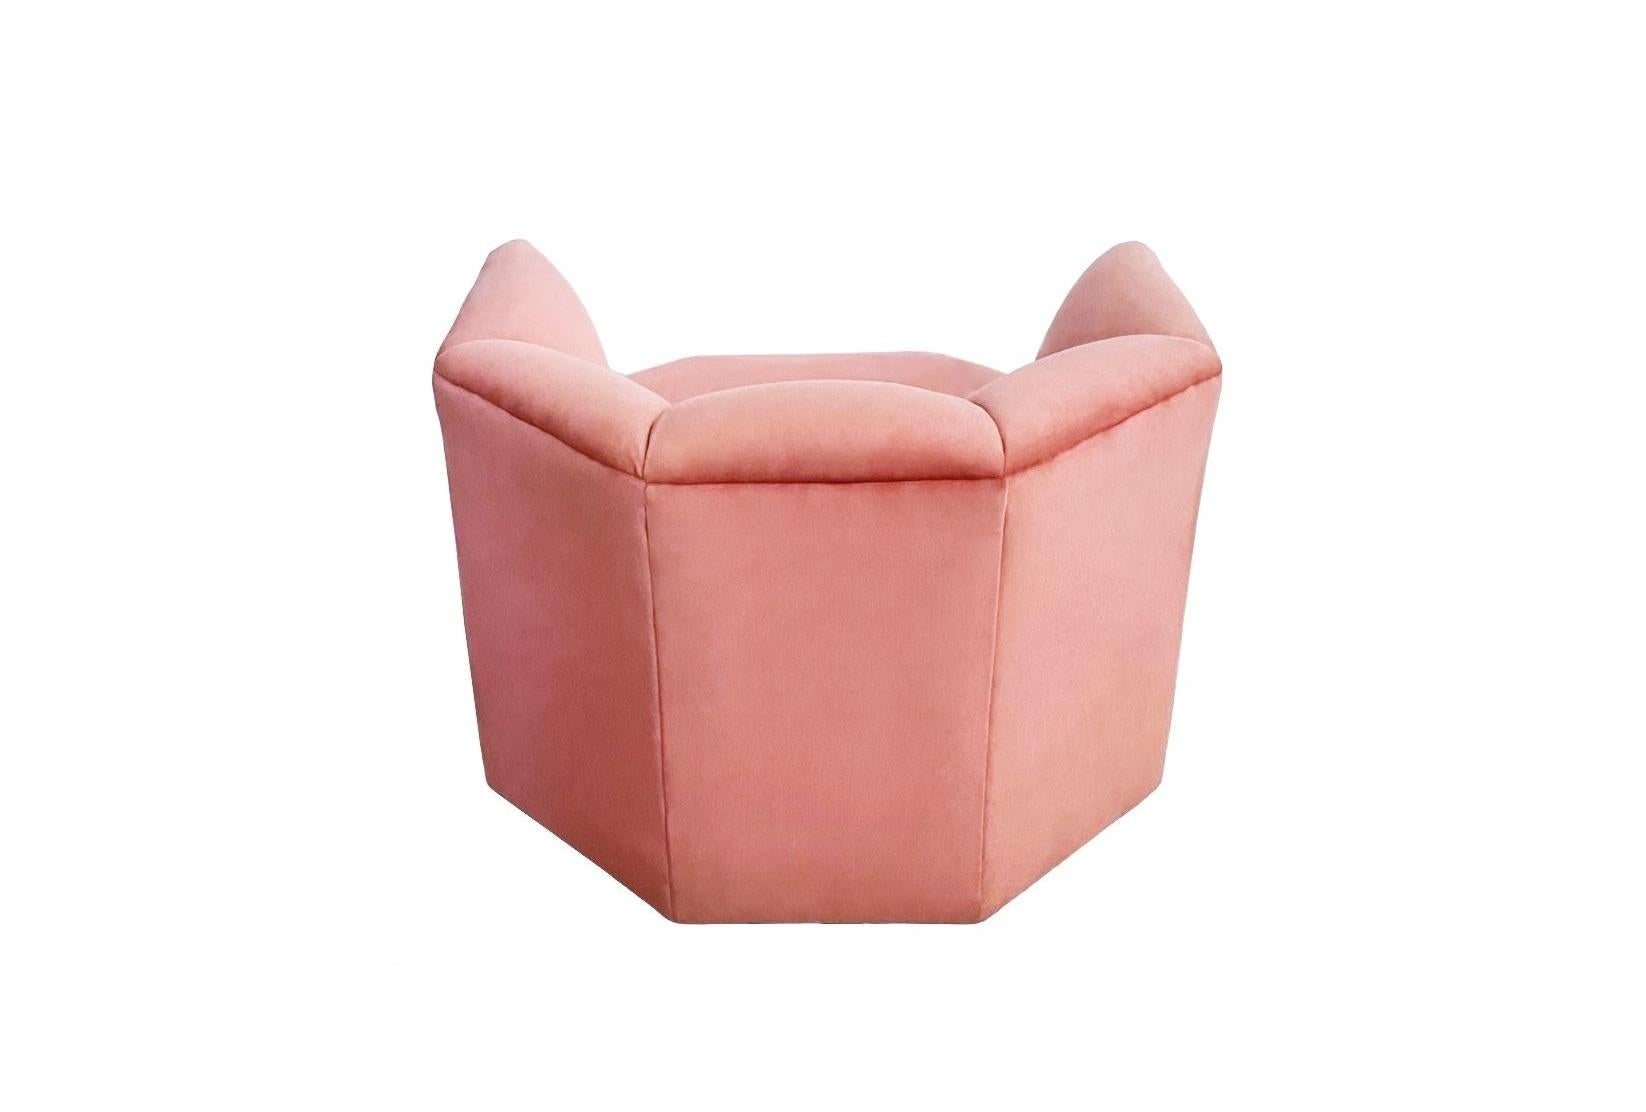 1970s Hexagonal Club Chairs in a Dusty Rose Velvet For Sale 6